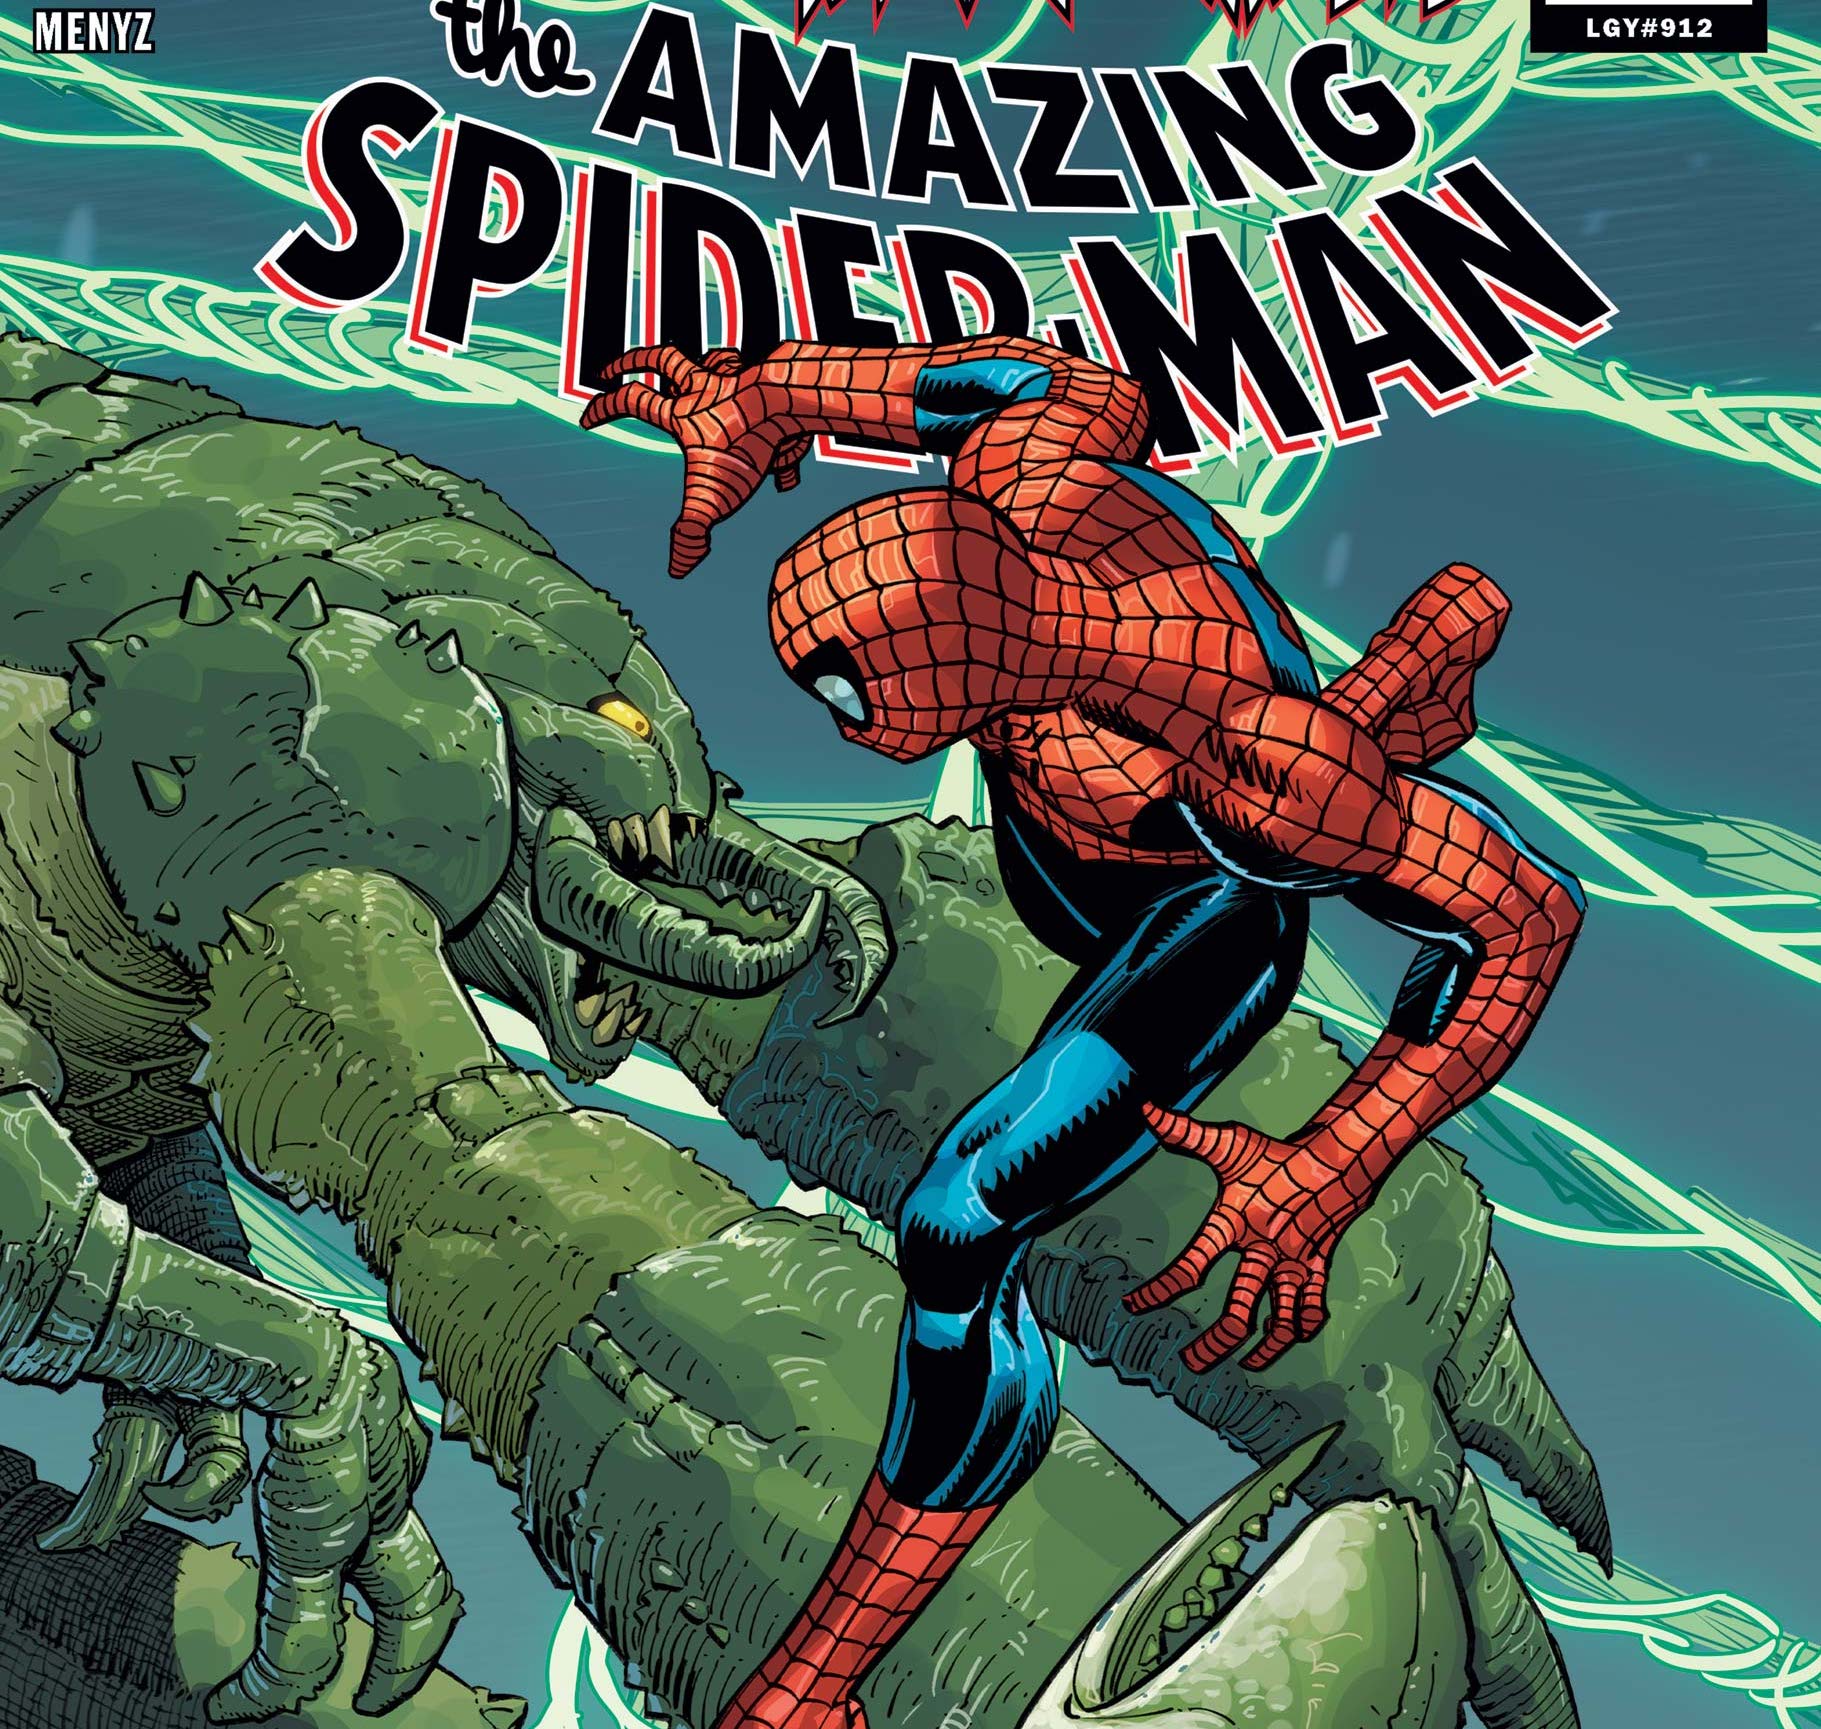 'Amazing Spider-Man' #18 is silly and over-the-top entertainment